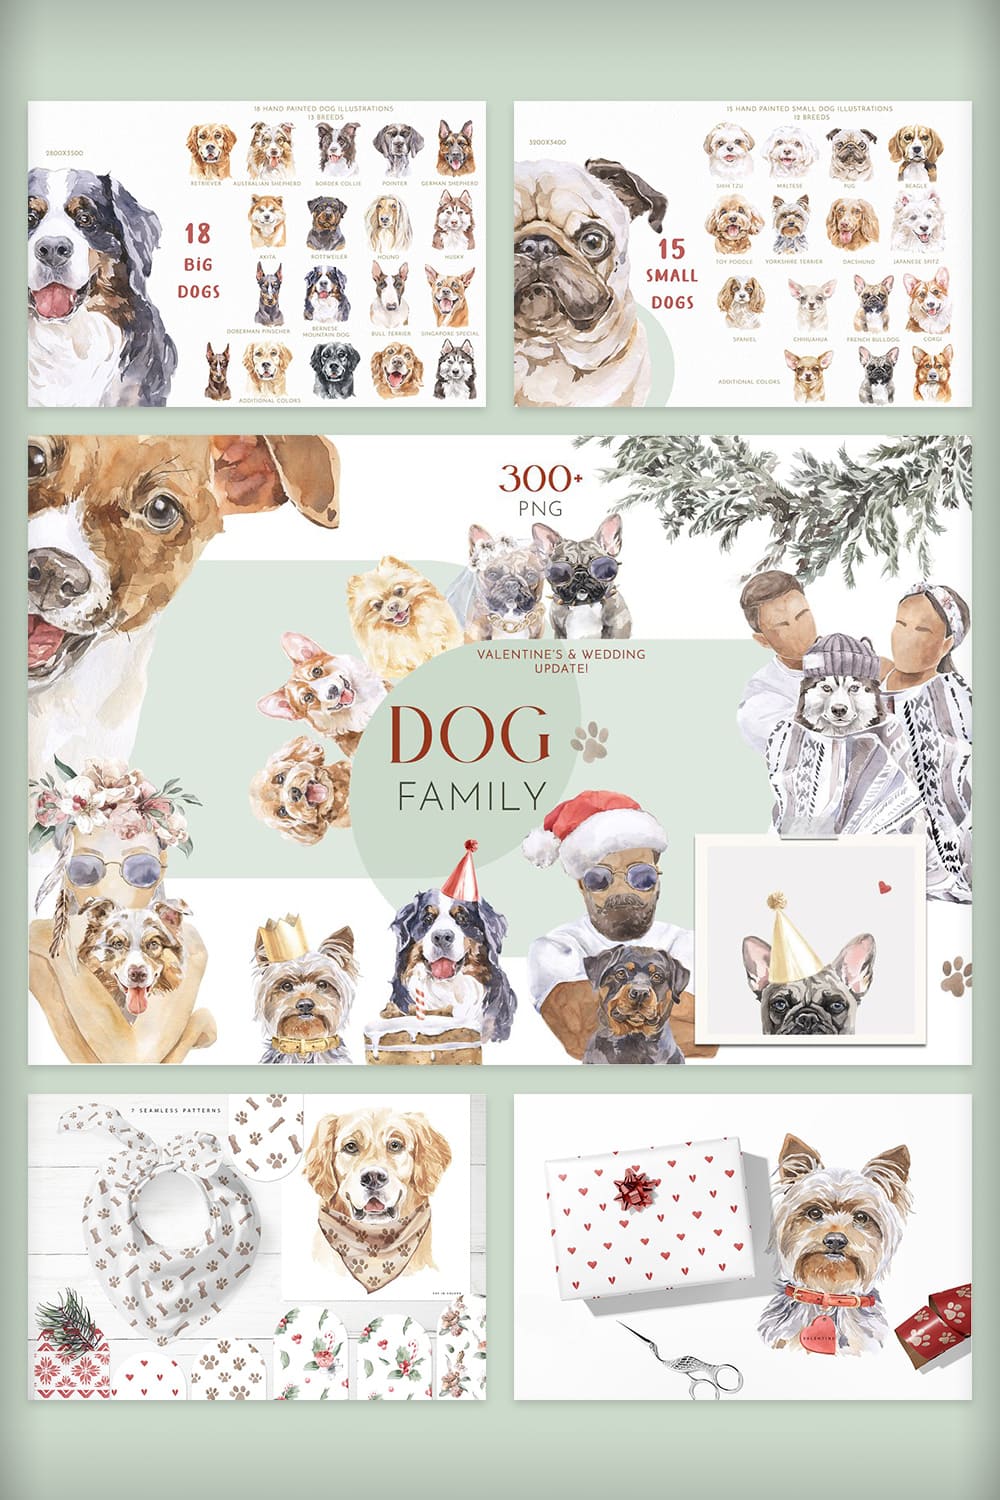 dog family character creator clipart pinterest image.